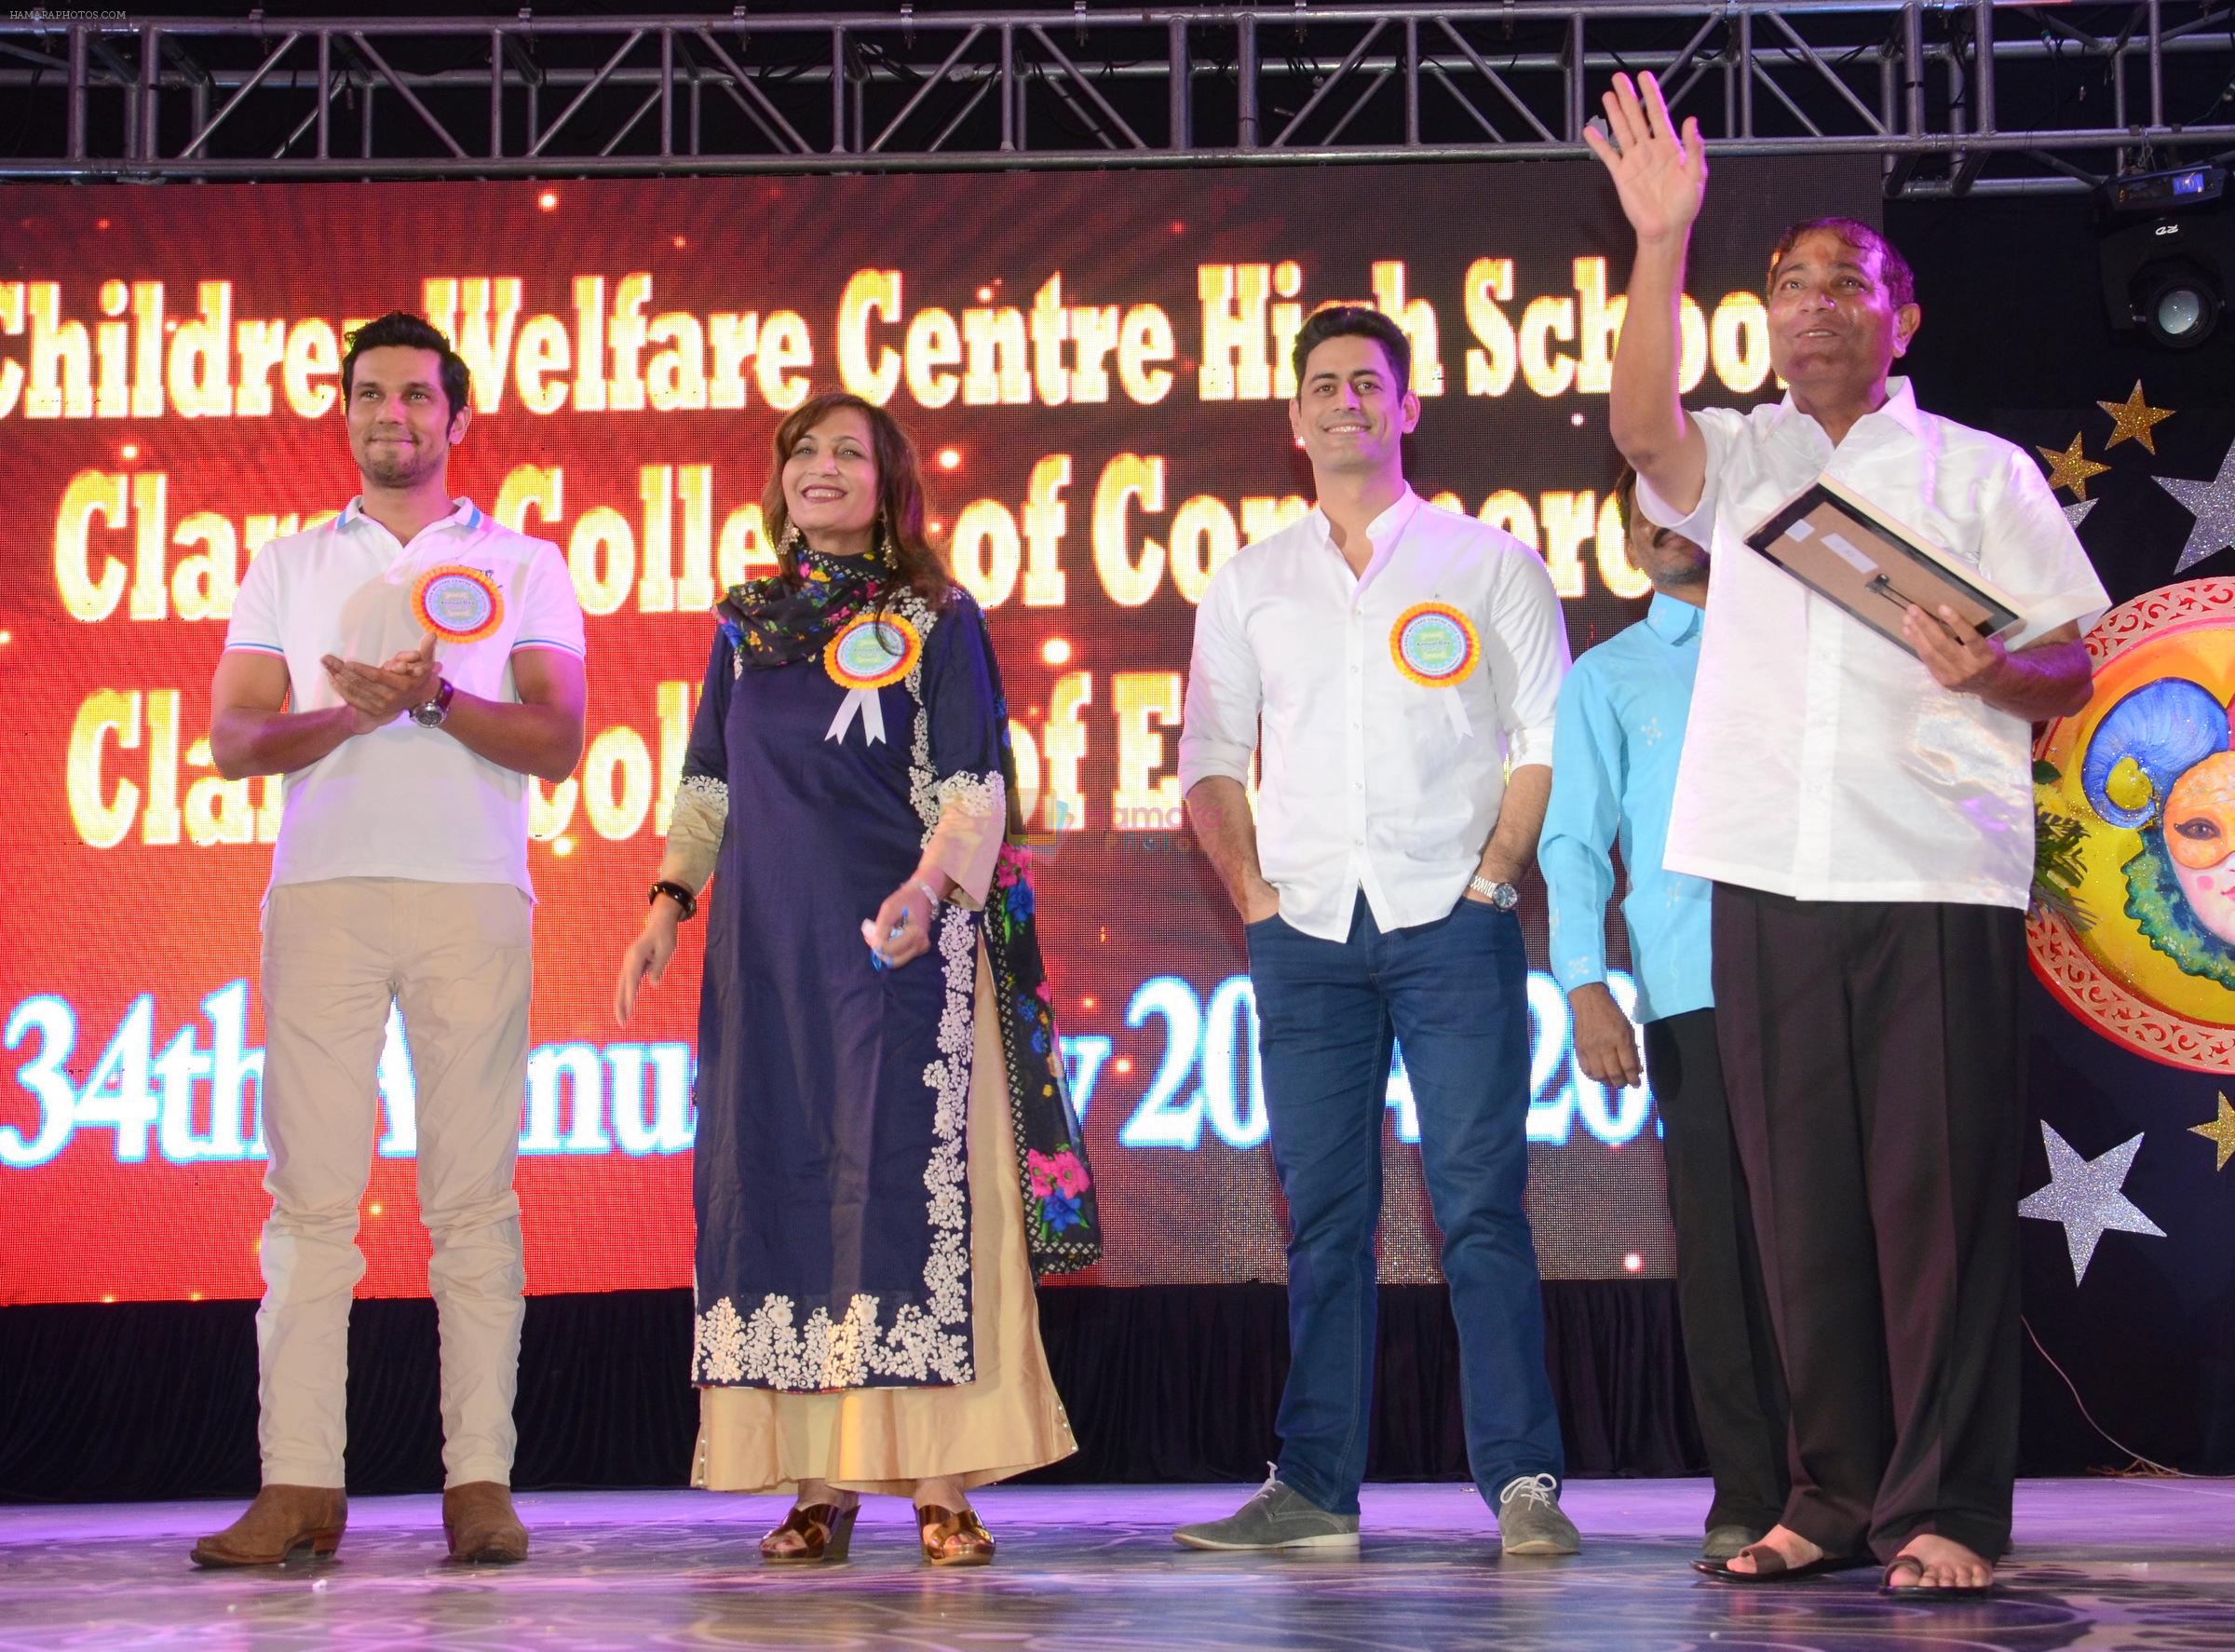 Ajay Kaul with Randeep Hooda and Mohit Raina at the 34th Annual Day Celebration and Prize Distribution Ceremony of Children�s Welfare Centre High School on 14th Feb 20